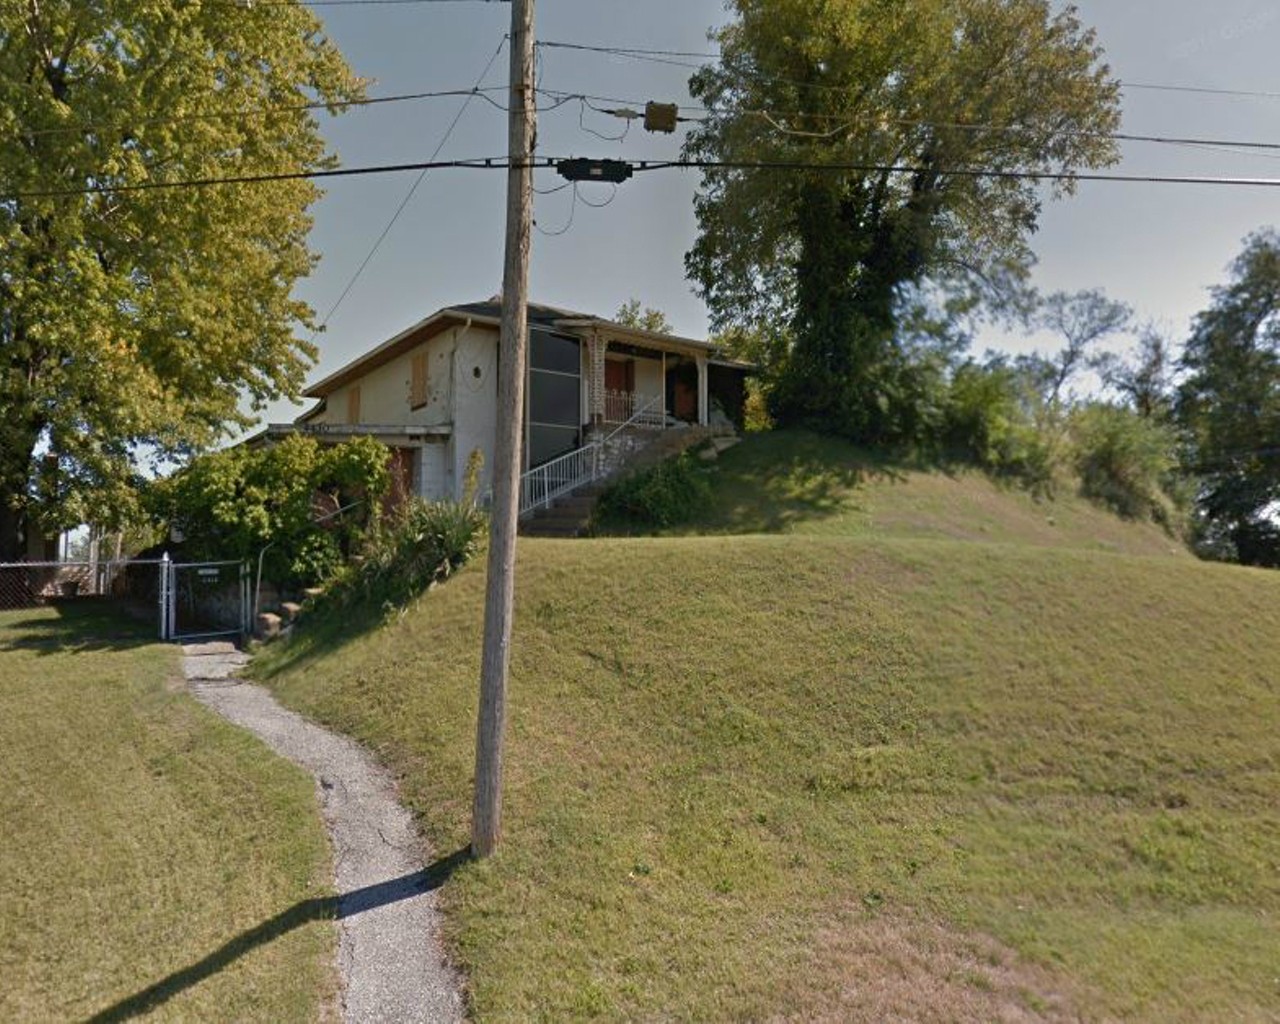 "We don't have mountains, but we have man-made mounds."
Sugarloaf Mound, 4420 Ohio Ave.
"This house was built on a mound that was built by Native Americans in, like, 600 A.D. There used to be a bunch of them and St. Louis was called 'Mound City.'"
Photo courtesy of Google Maps